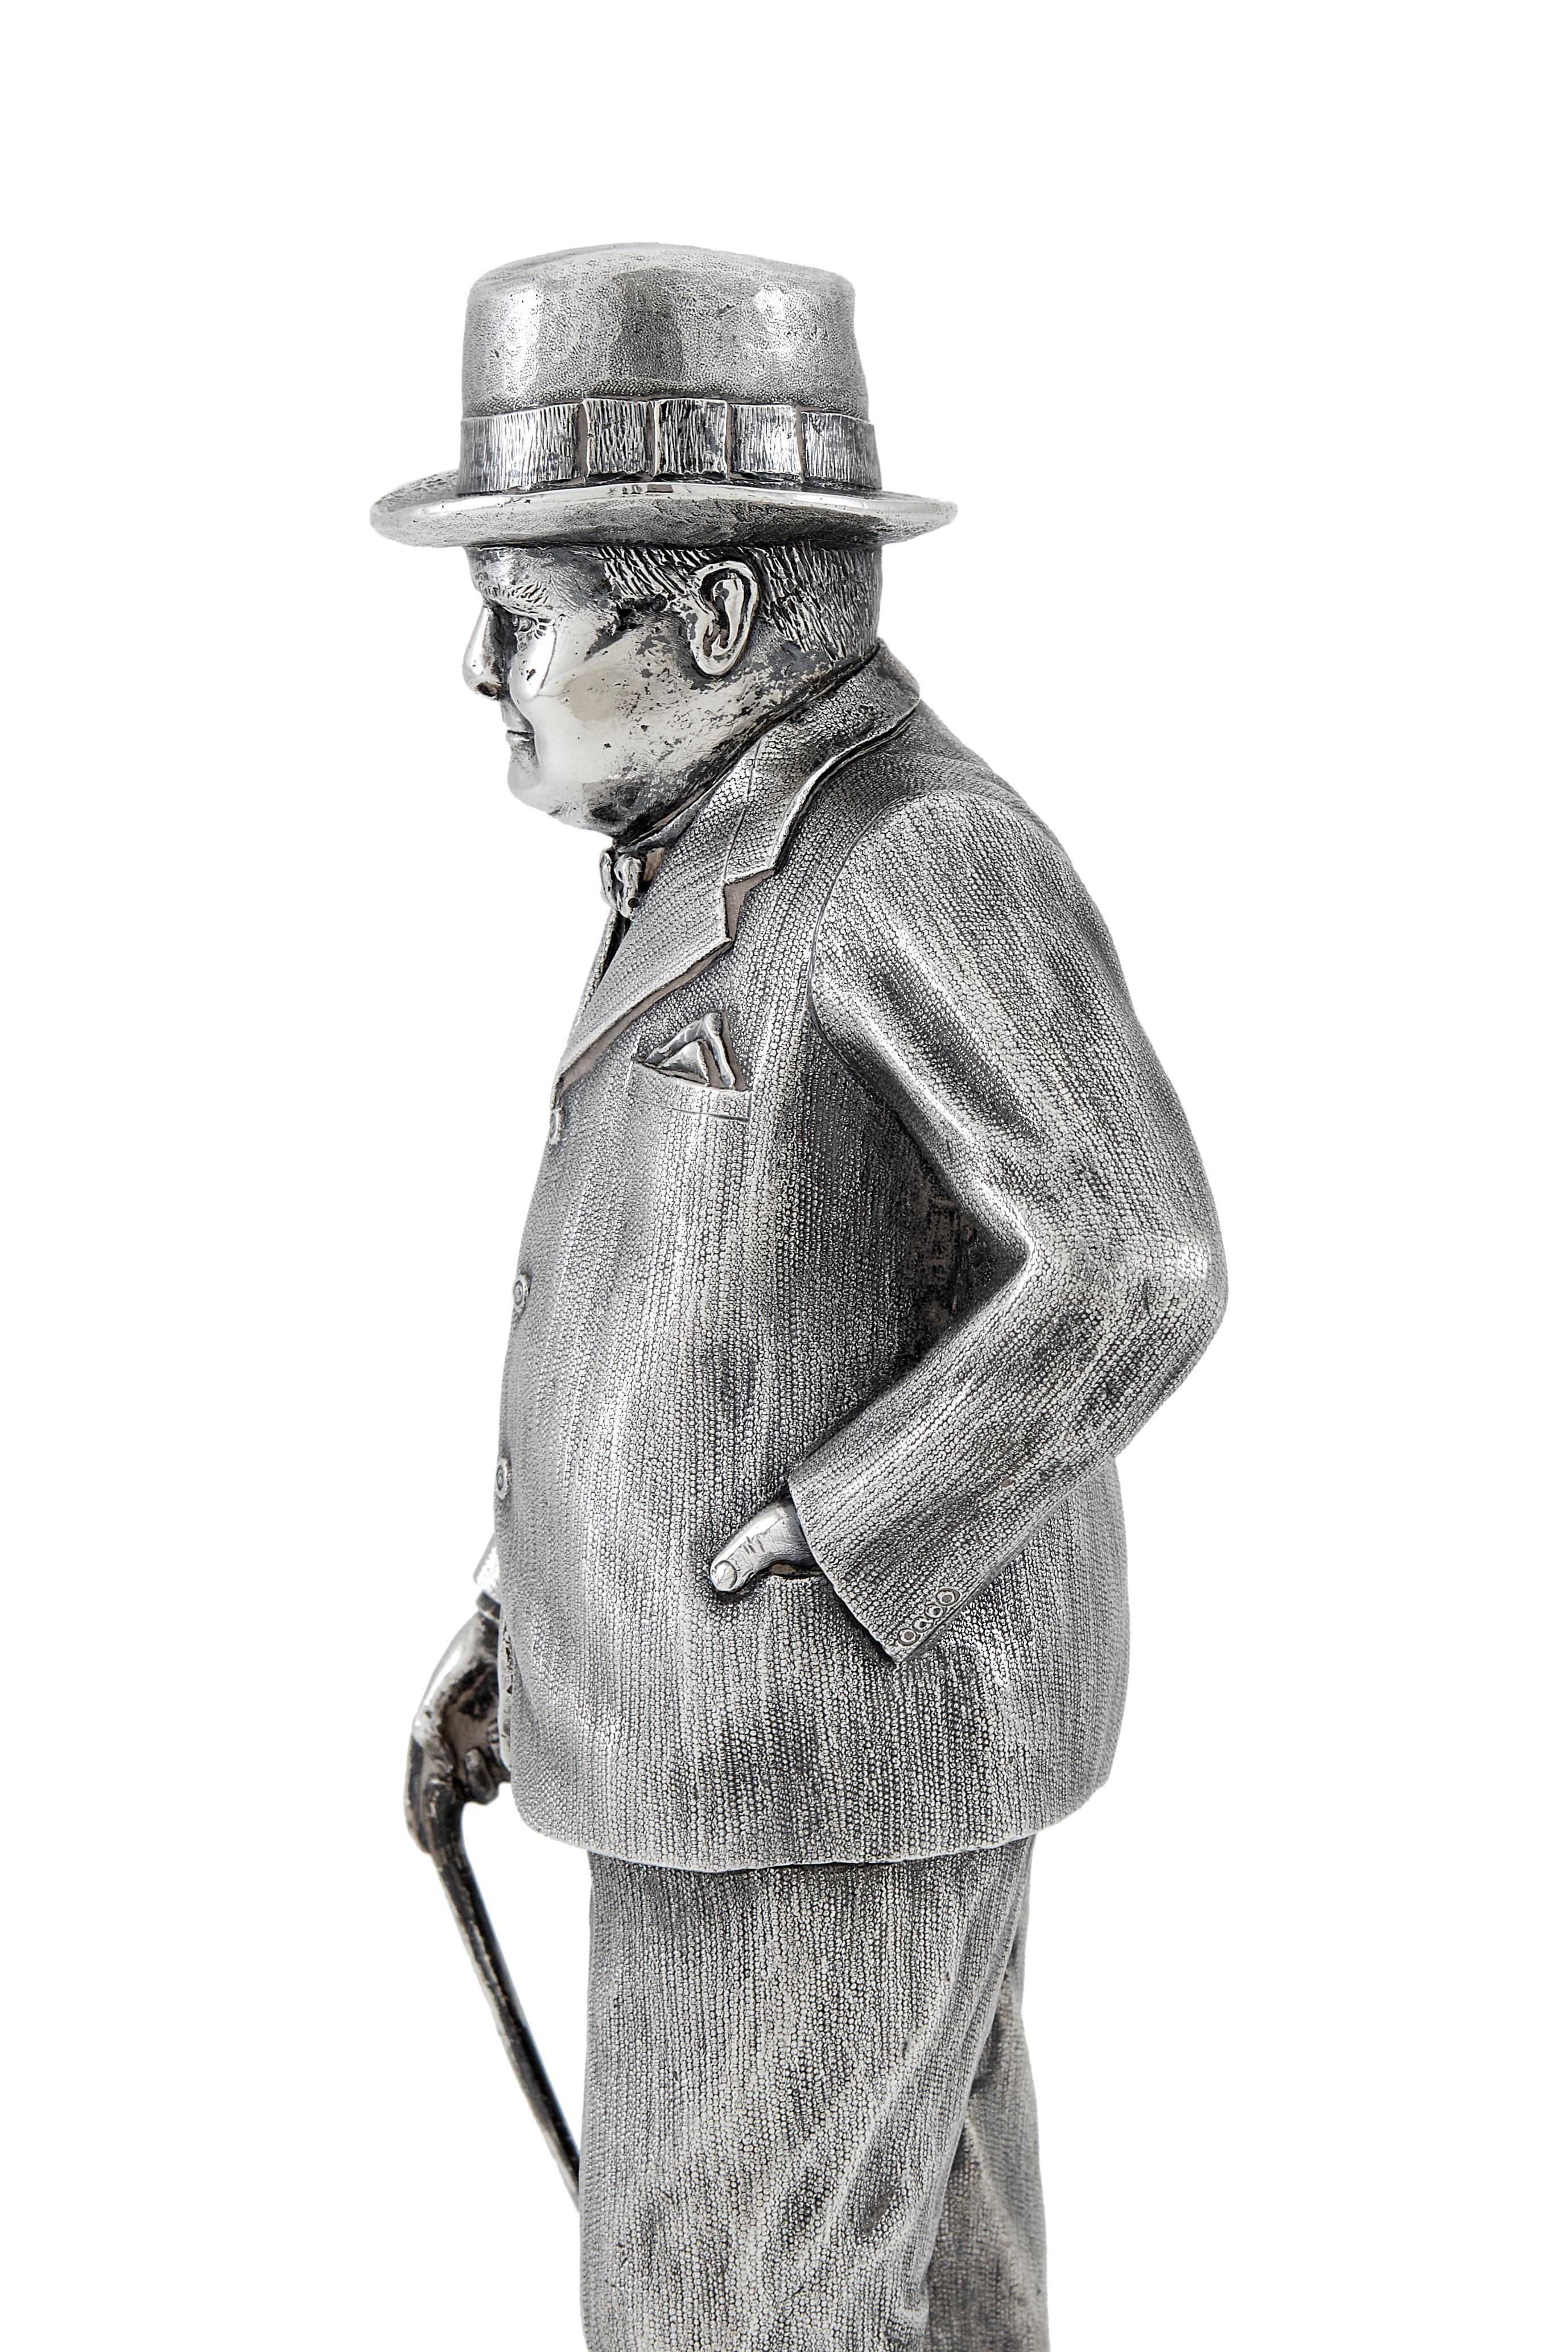 English Extremely Heavy Cast Silver Statuette of Prime Minister Winston Churchill